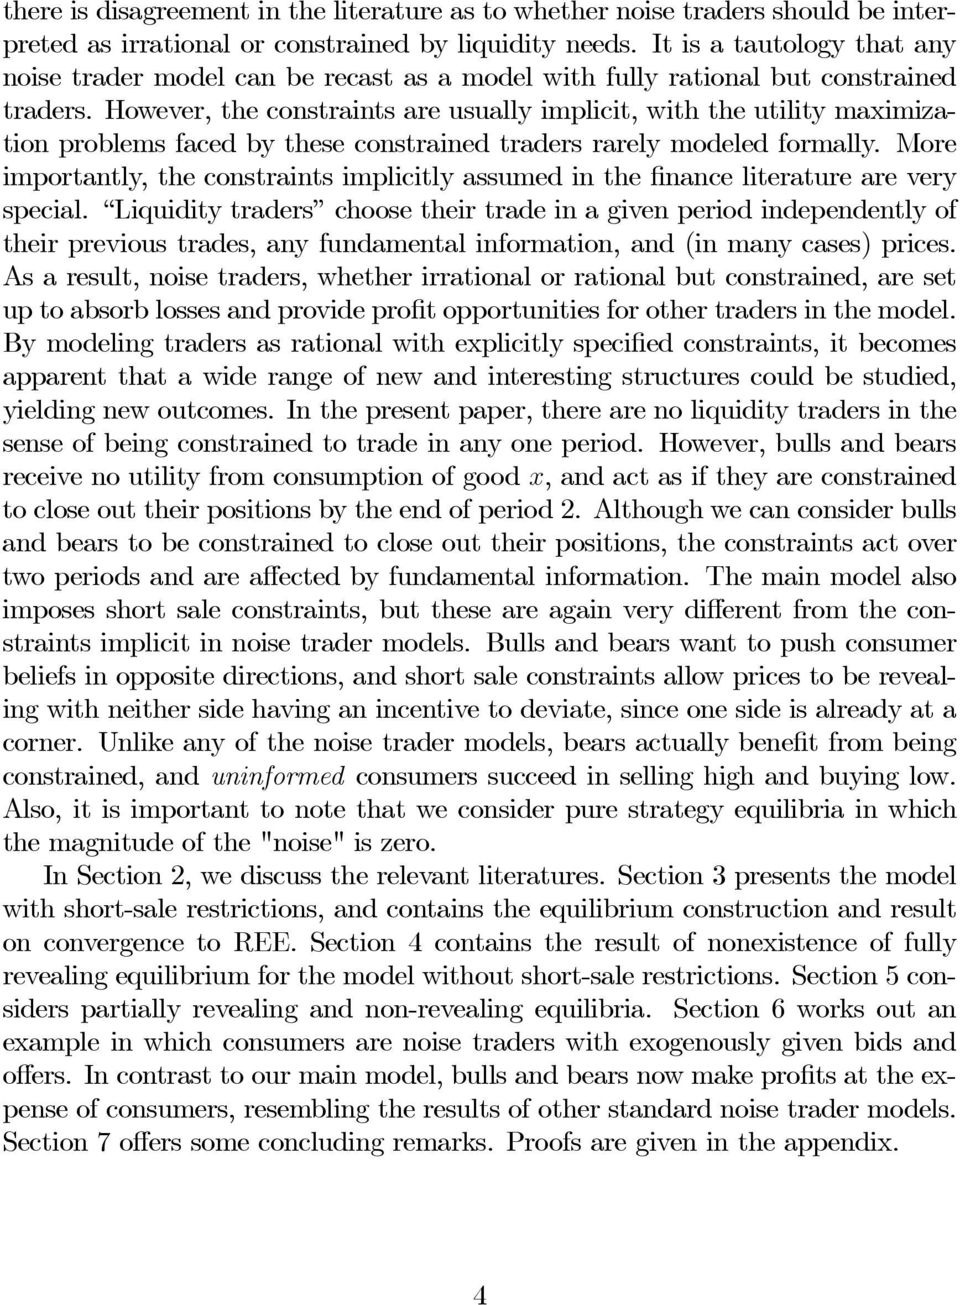 However, the constraints are usually implicit, with the utility maximization problems faced by these constrained traders rarely modeled formally.